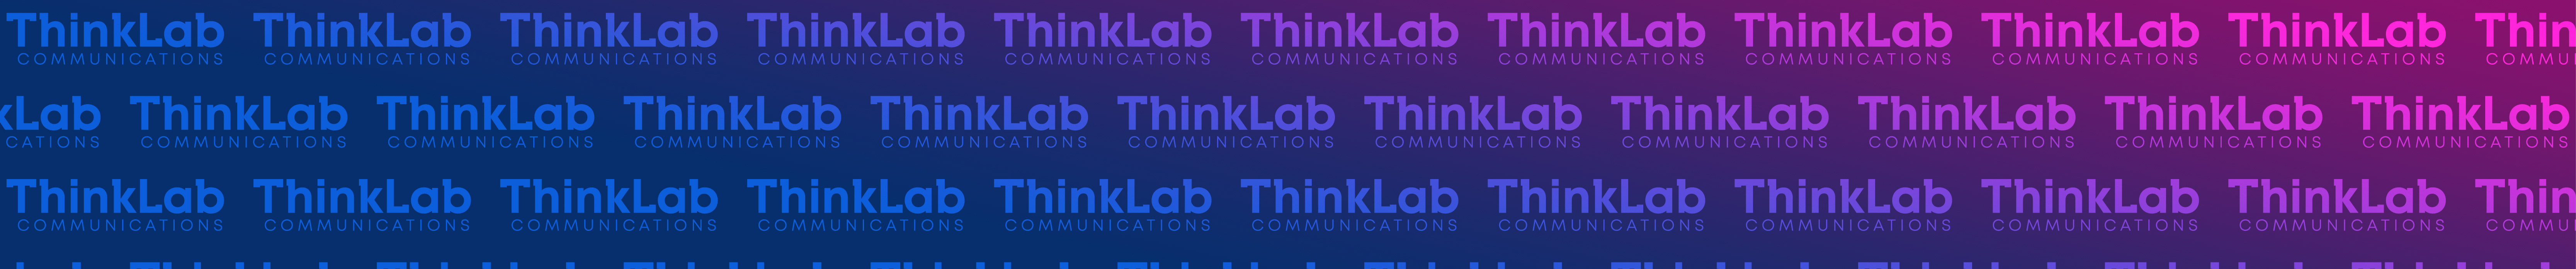 ThinkLab Communications's profile banner